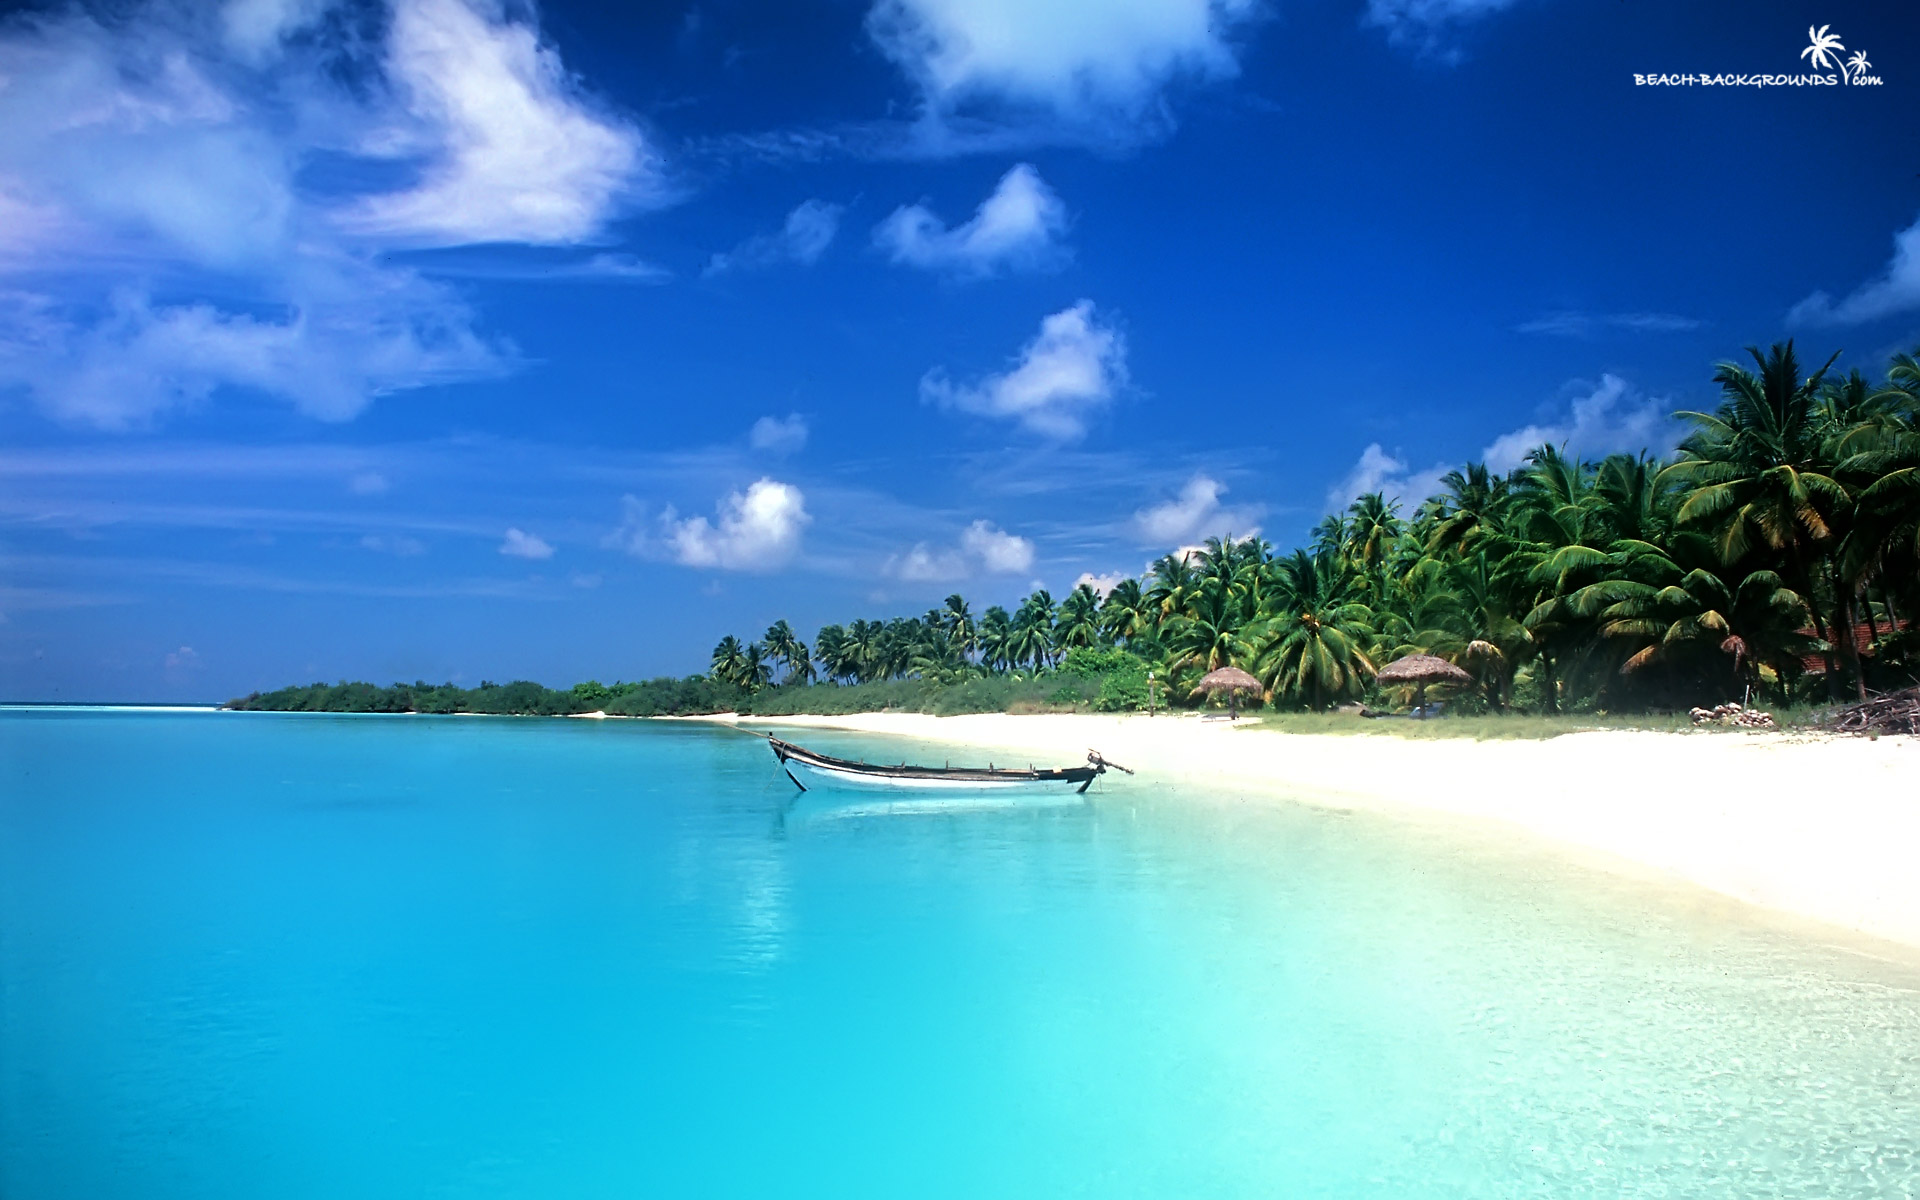 Paste Beach Background Tropical Image Wallpaper Of